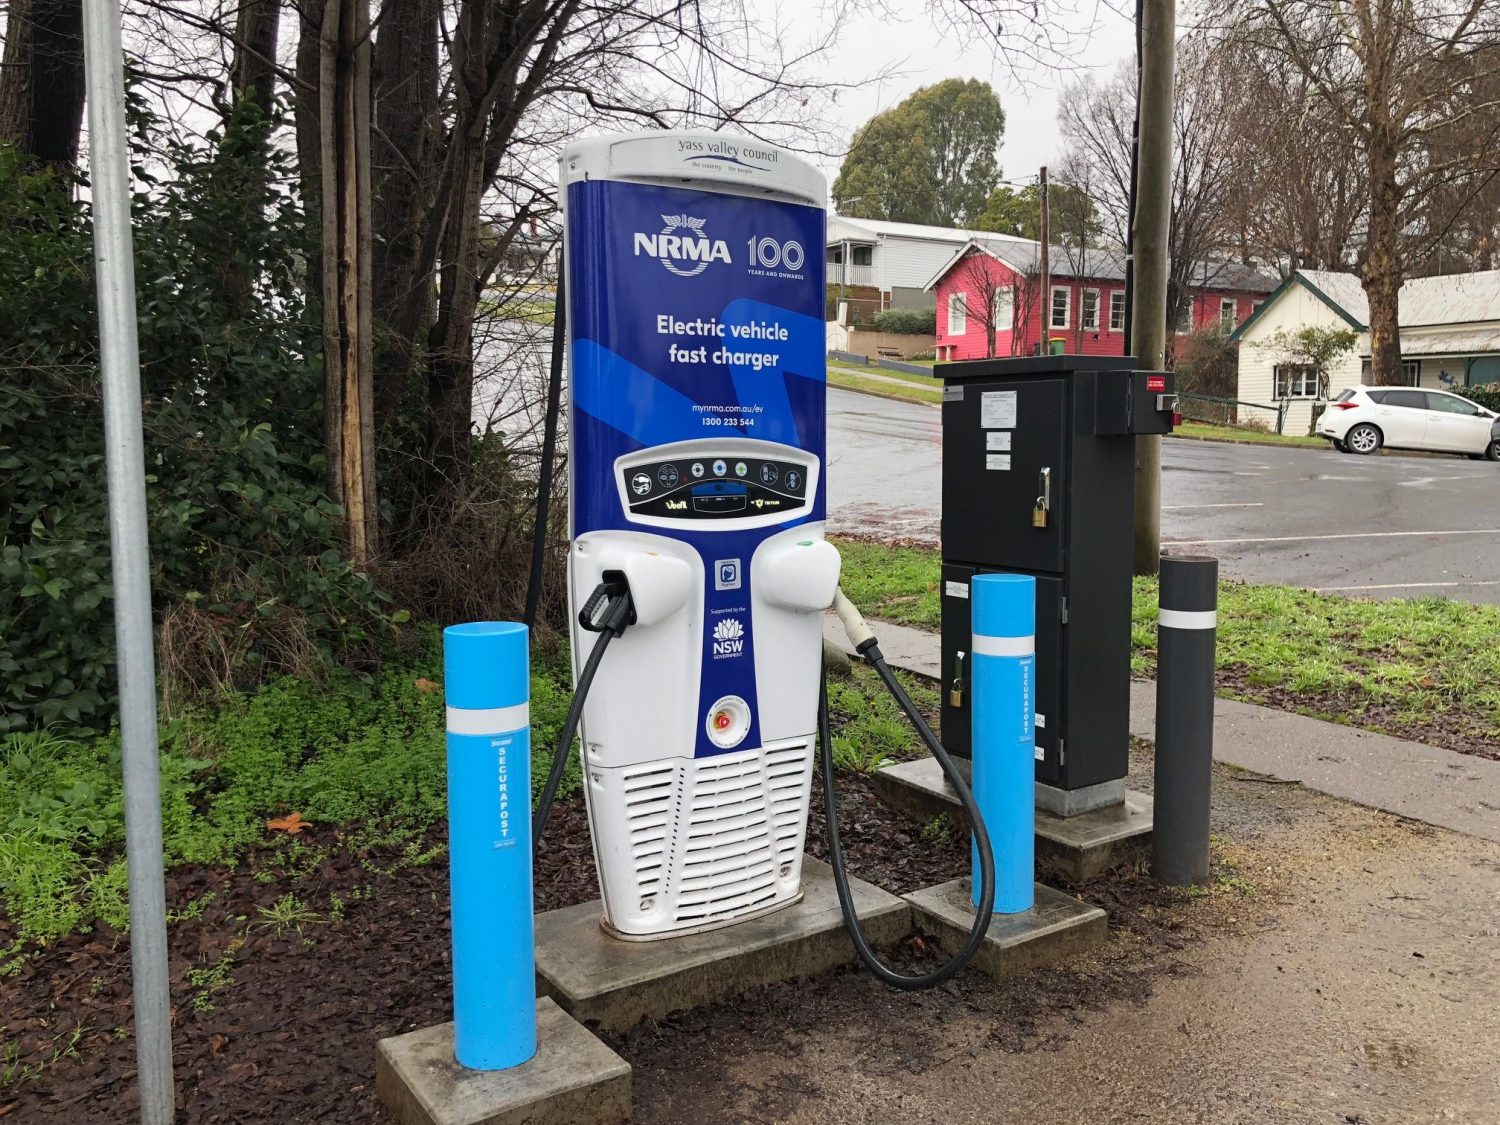 More electric car charging stations proposed in LGA | Yass Valley Times